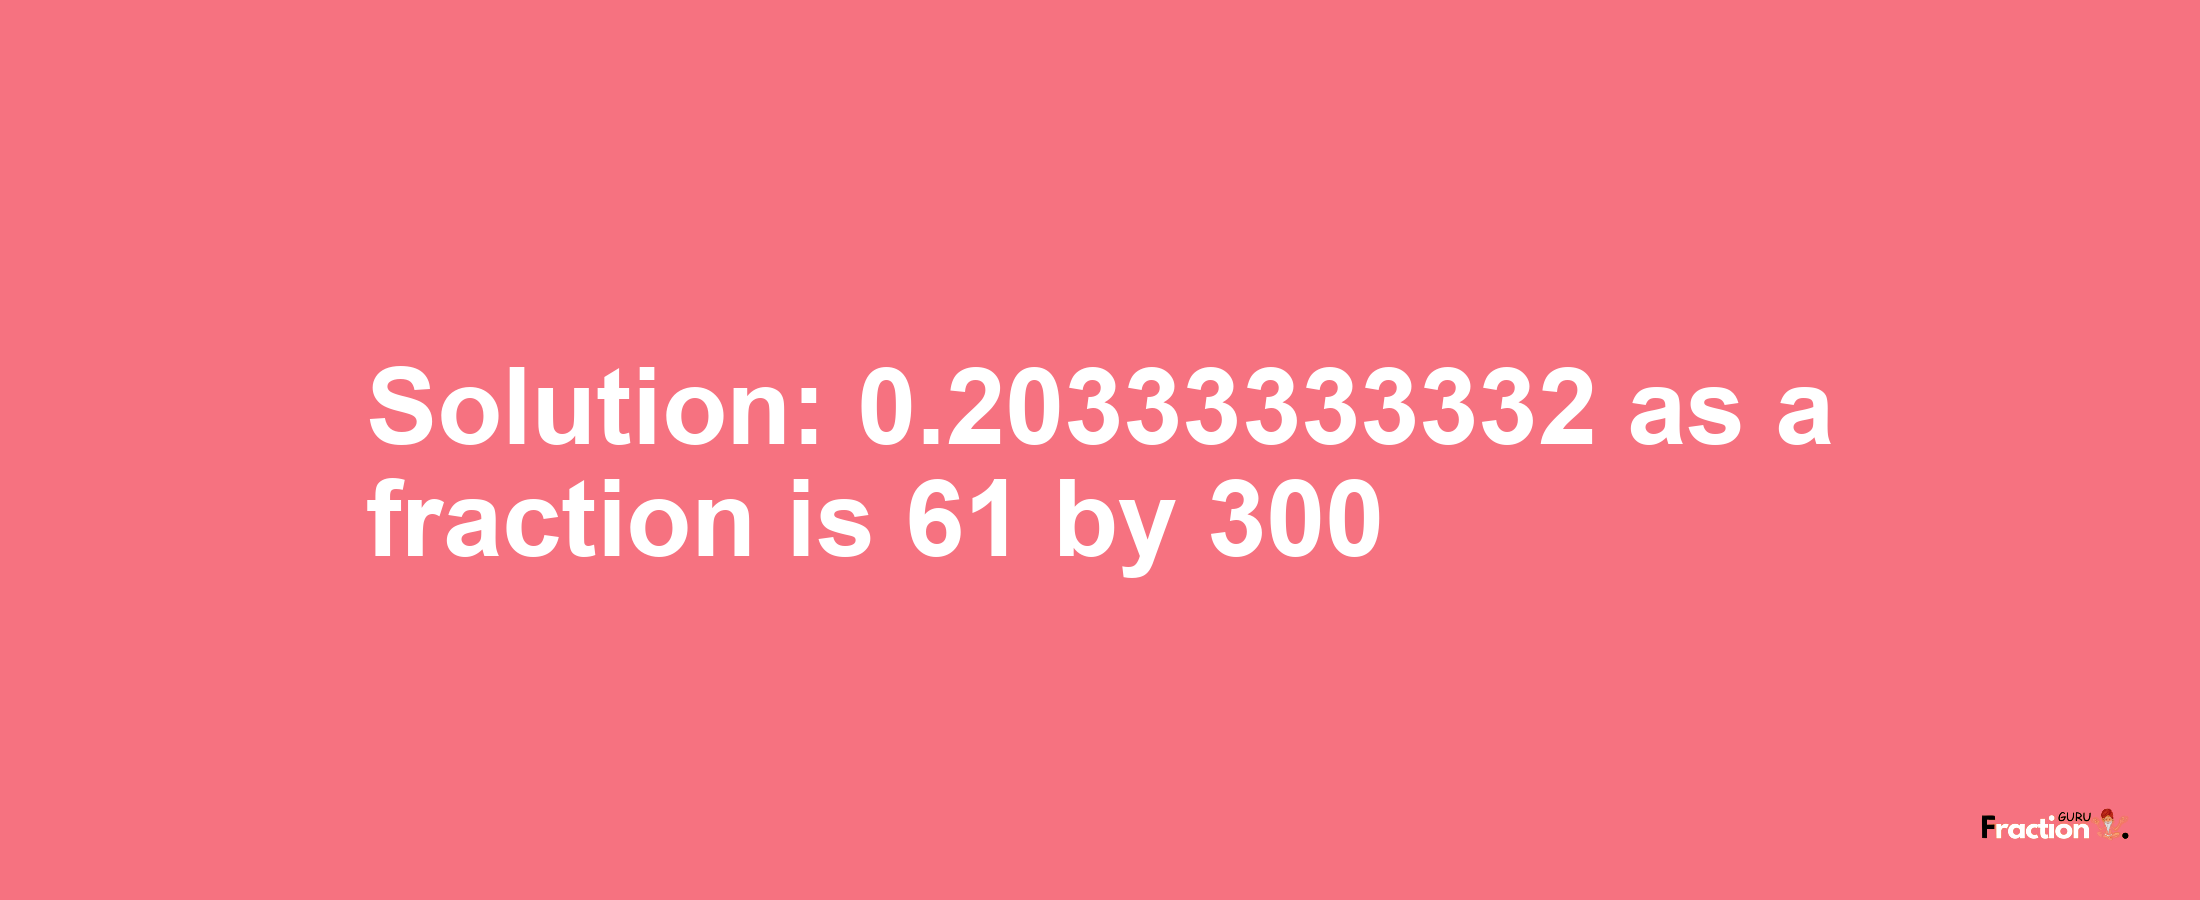 Solution:0.20333333332 as a fraction is 61/300